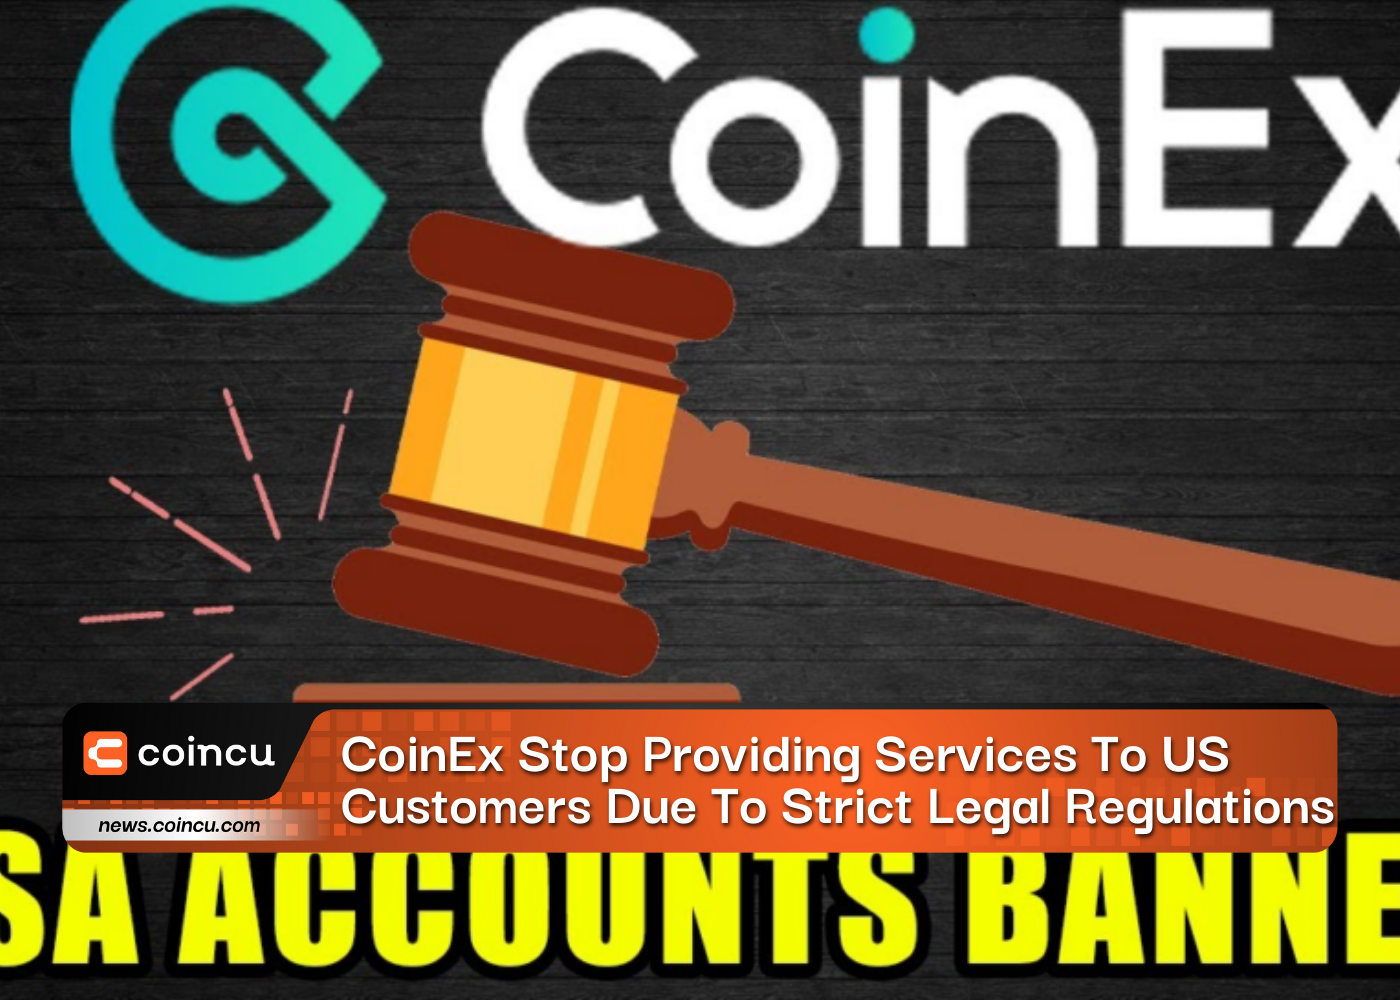 CoinEx Stop Providing Services To US Customers Due To Strict Legal Regulations